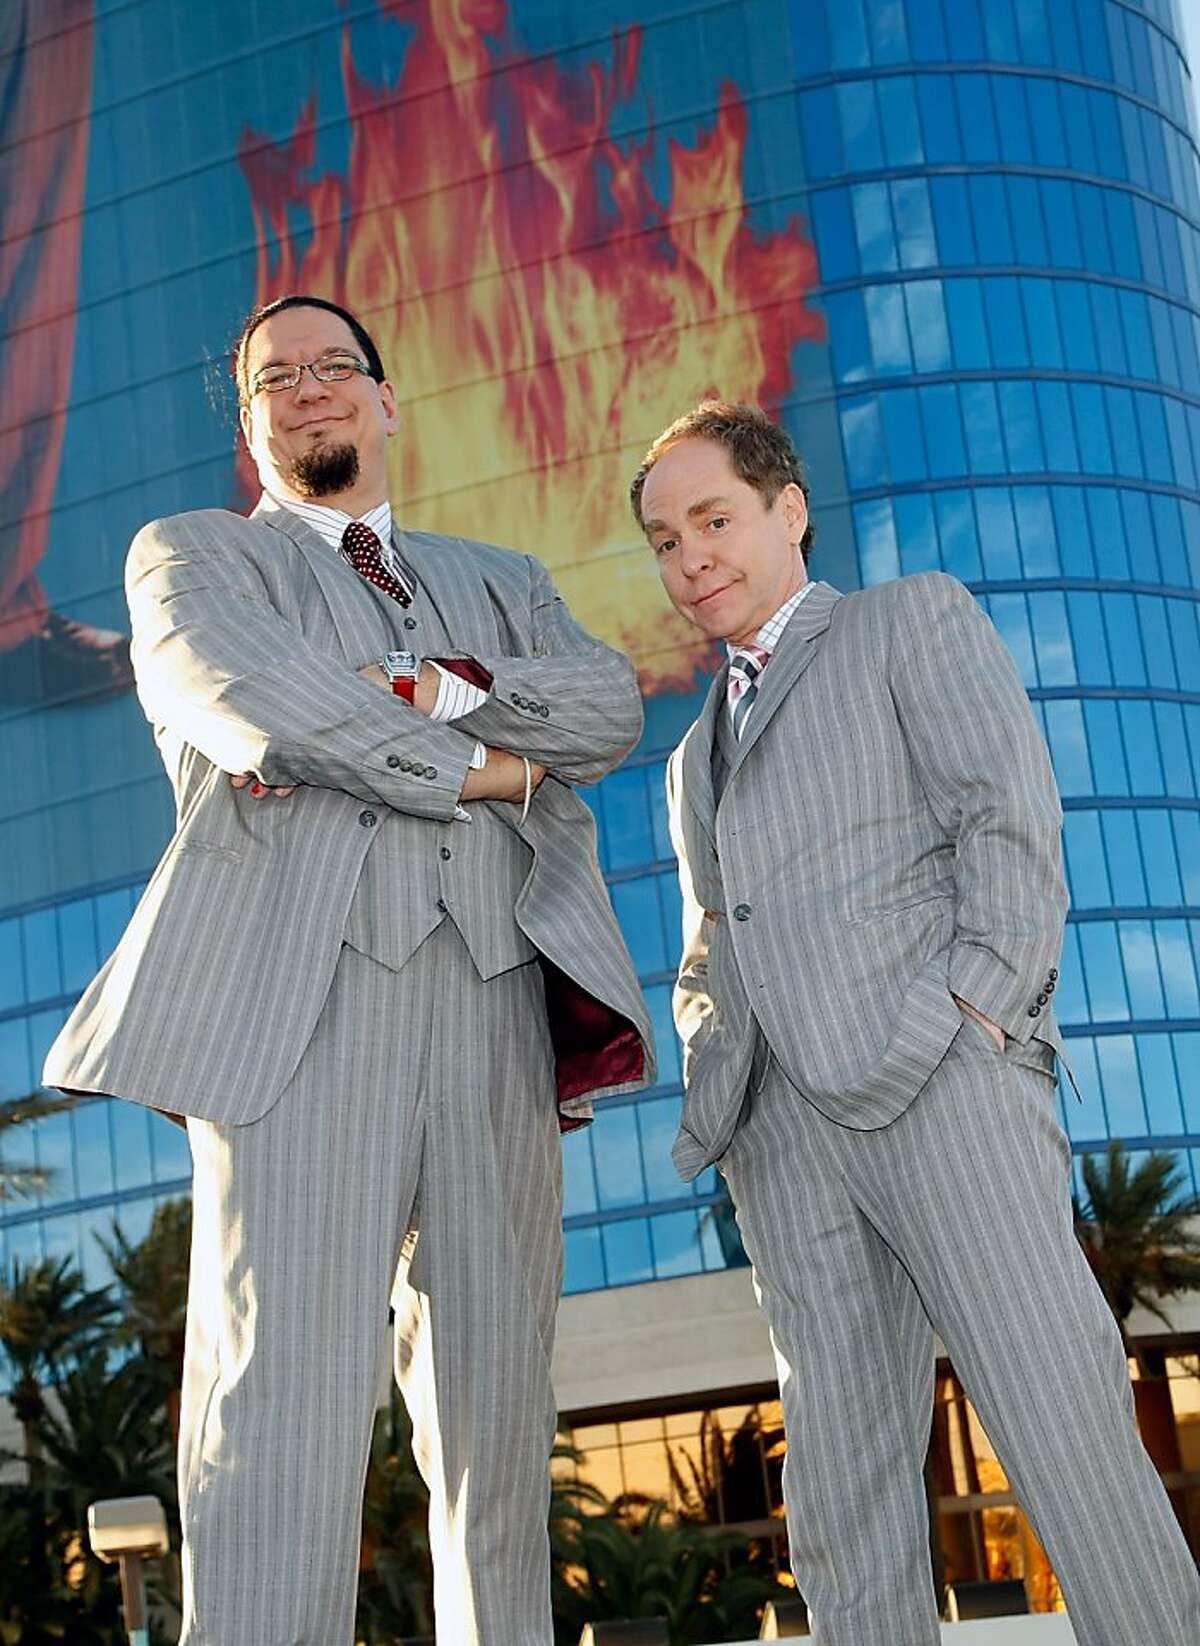 Penn Jillette (L) and Teller of the comedy/magic team Penn & Teller appear at the Rio Hotel & Casino. LAS VEGAS - MARCH 3: Penn Jillette (L) and Teller of the comedy/magic team Penn & Teller appear at the Rio Hotel & Casino to celebrate the duo's 35 years performing together March 3, 2009 in Las Vegas, Nevada. A 28-story tall building wrap of their likeness was unveiled on the side of the Rio where the pair currently headlines a show. (Photo by Ethan Miller/Getty Images)